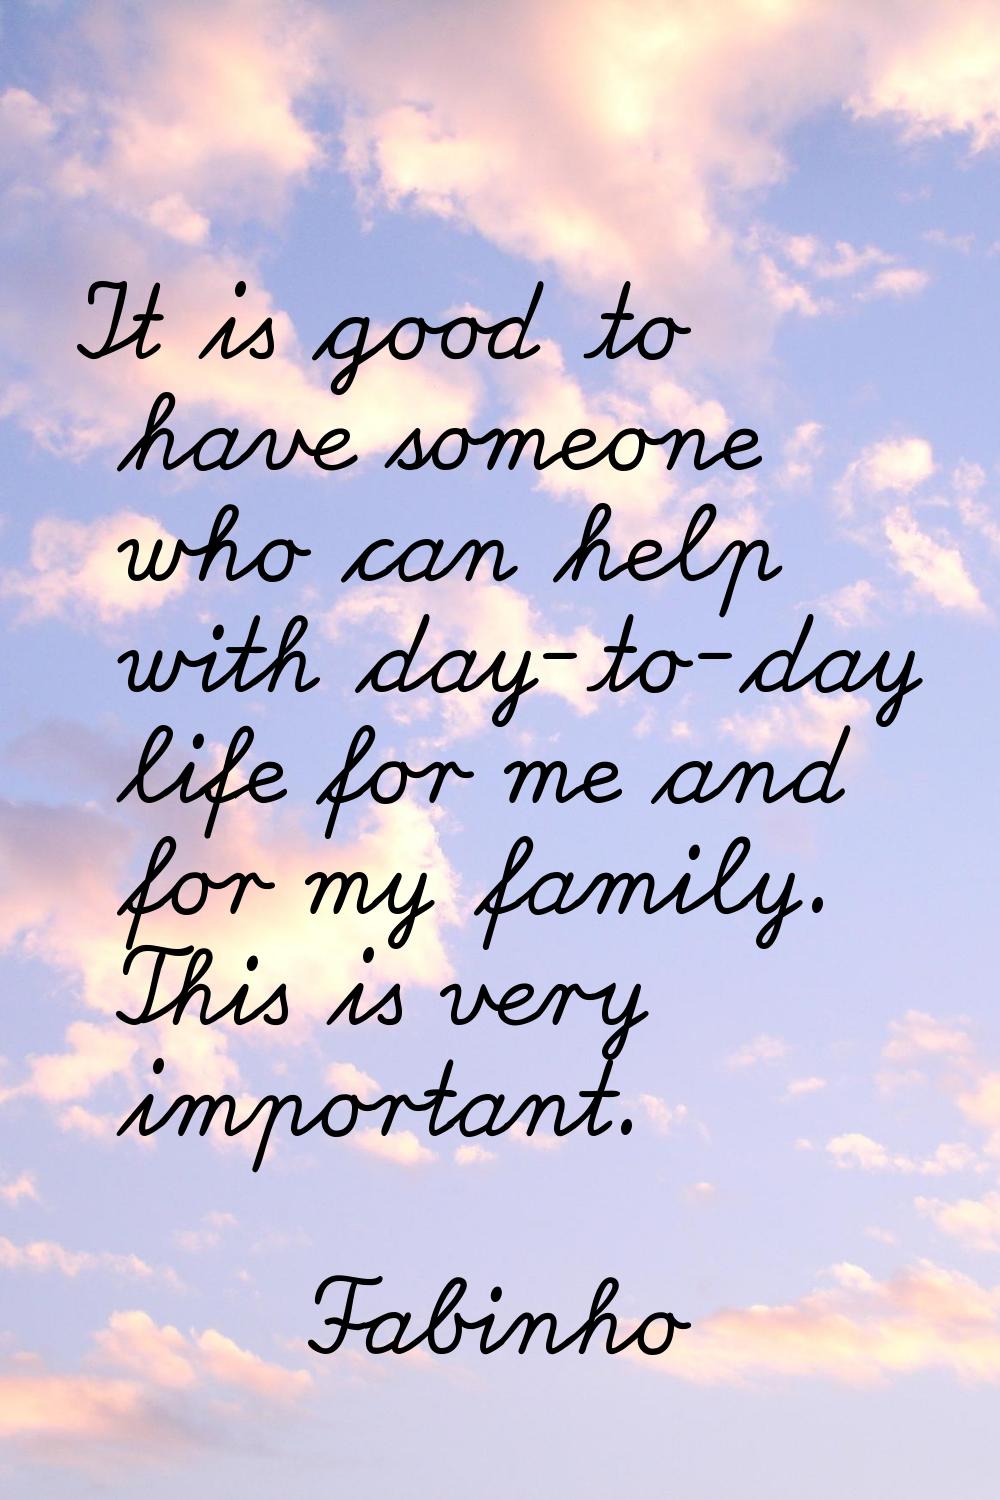 It is good to have someone who can help with day-to-day life for me and for my family. This is very